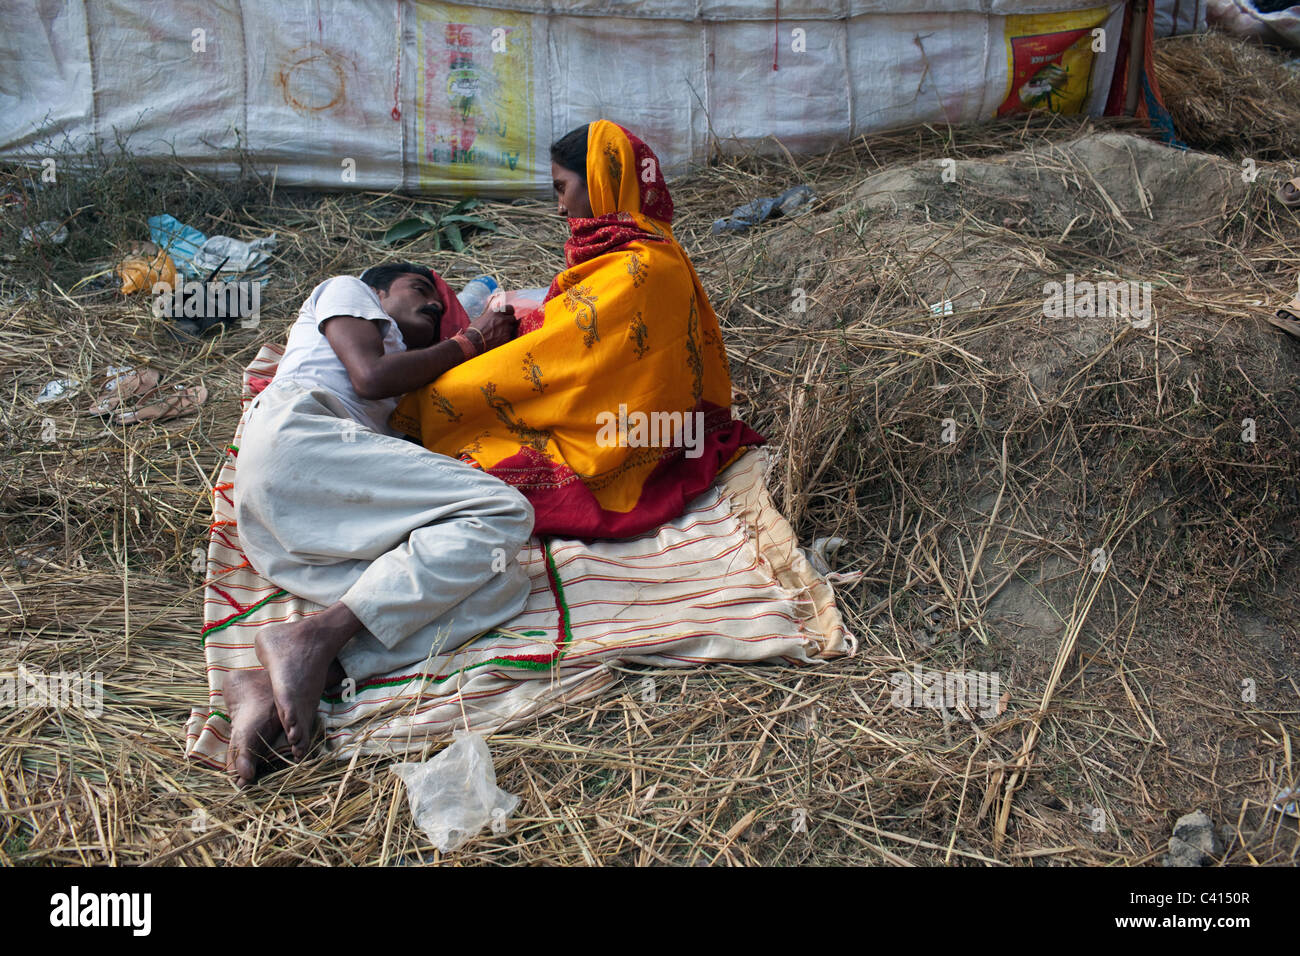 A young Indian couple in a tender pose at Sonepur Mela in Sonepur in Bihar state, India. Stock Photo